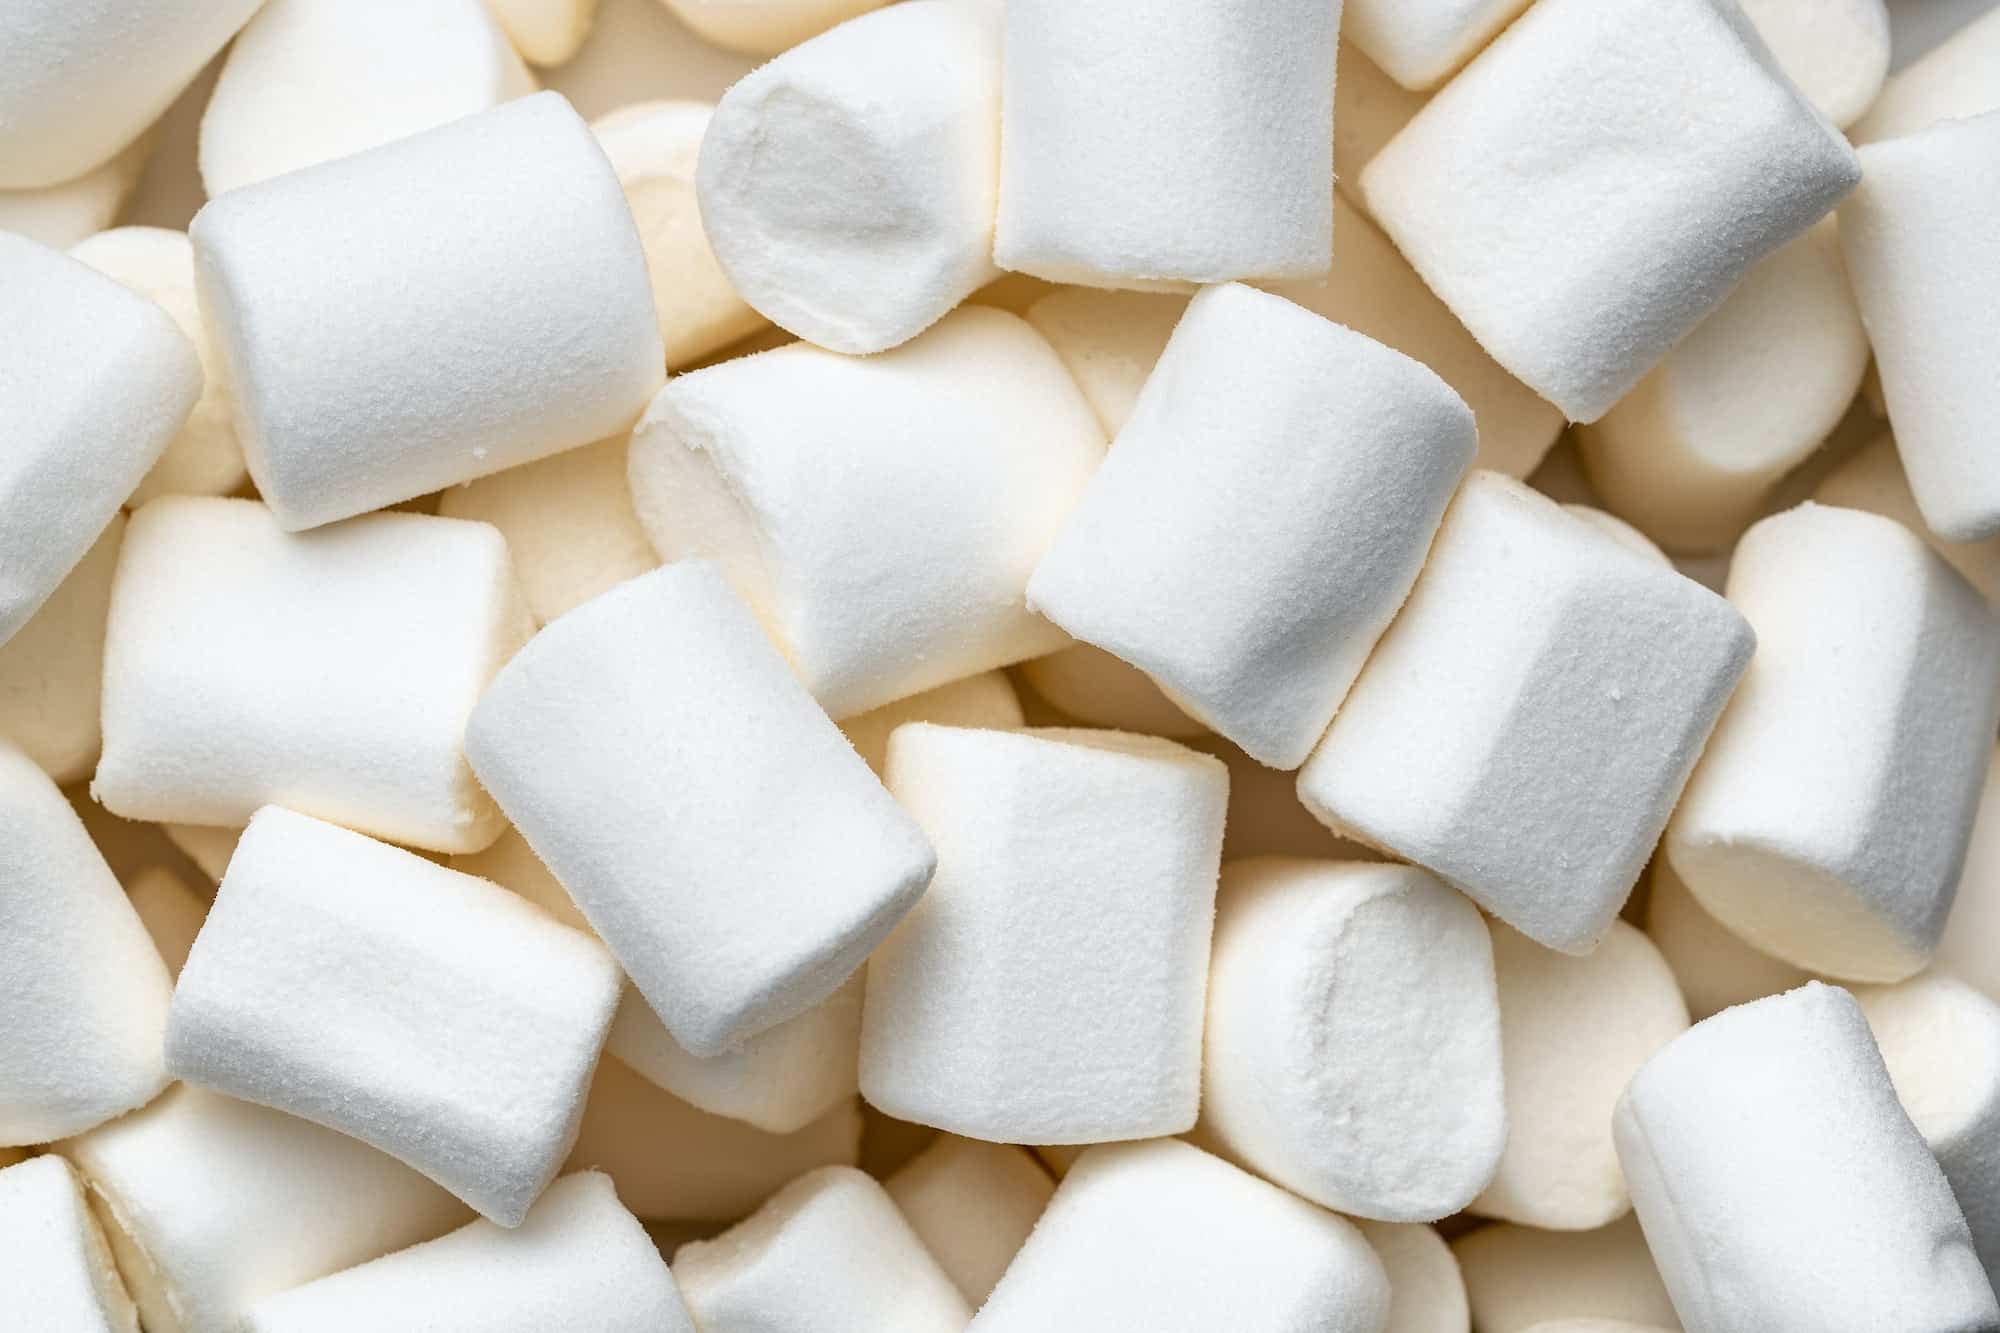 White sweet marshmallows candy.